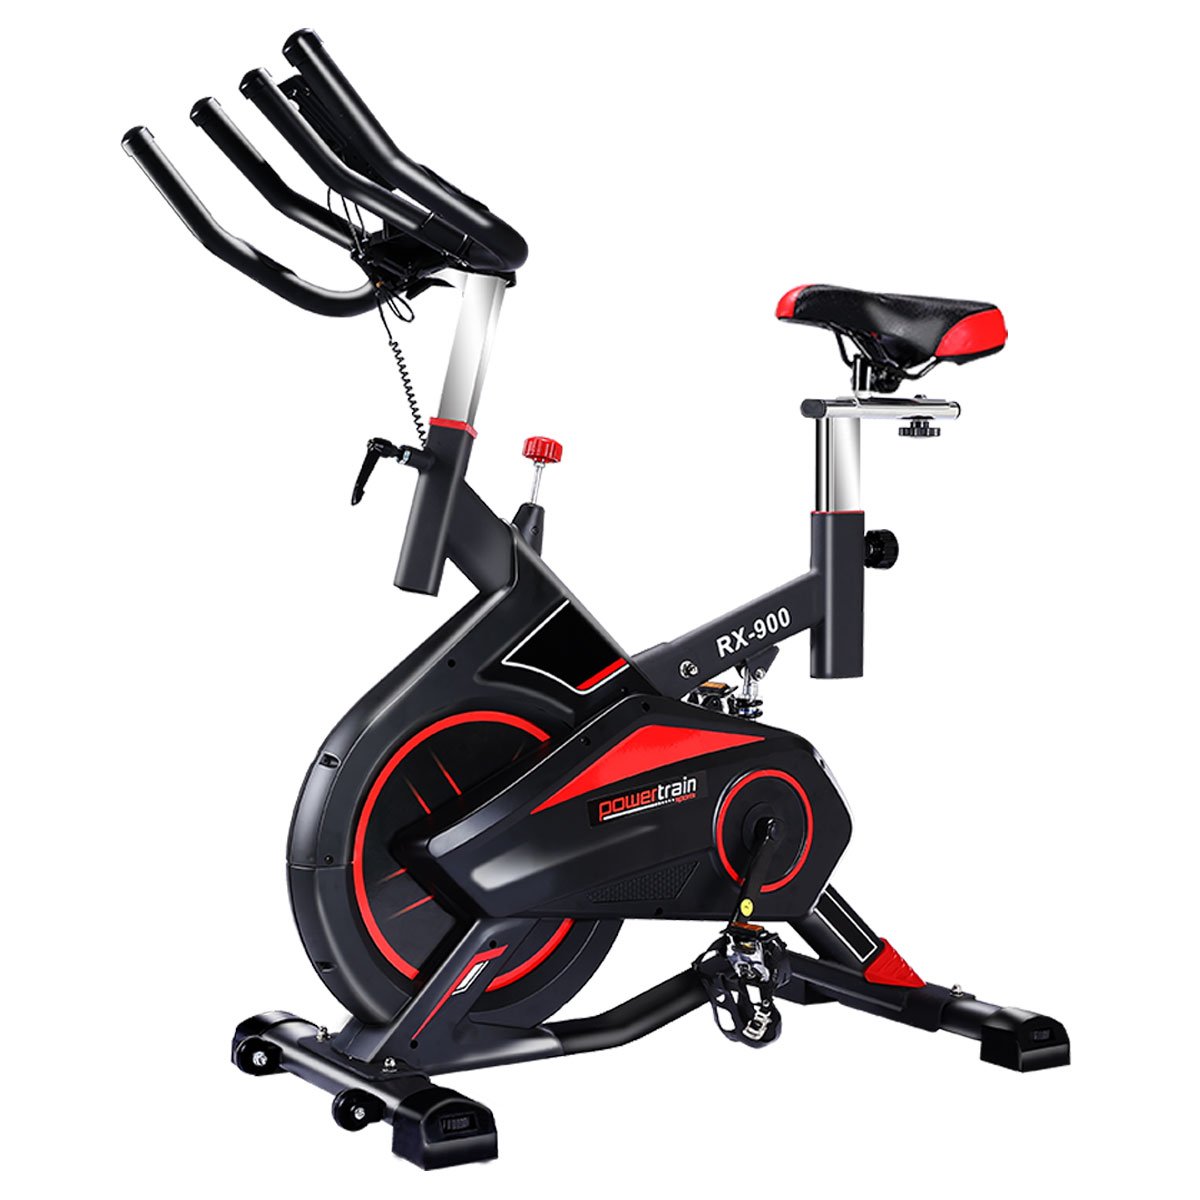 Powertrain RX-900 Exercise Spin Bike Cardio Cycling - Red 2